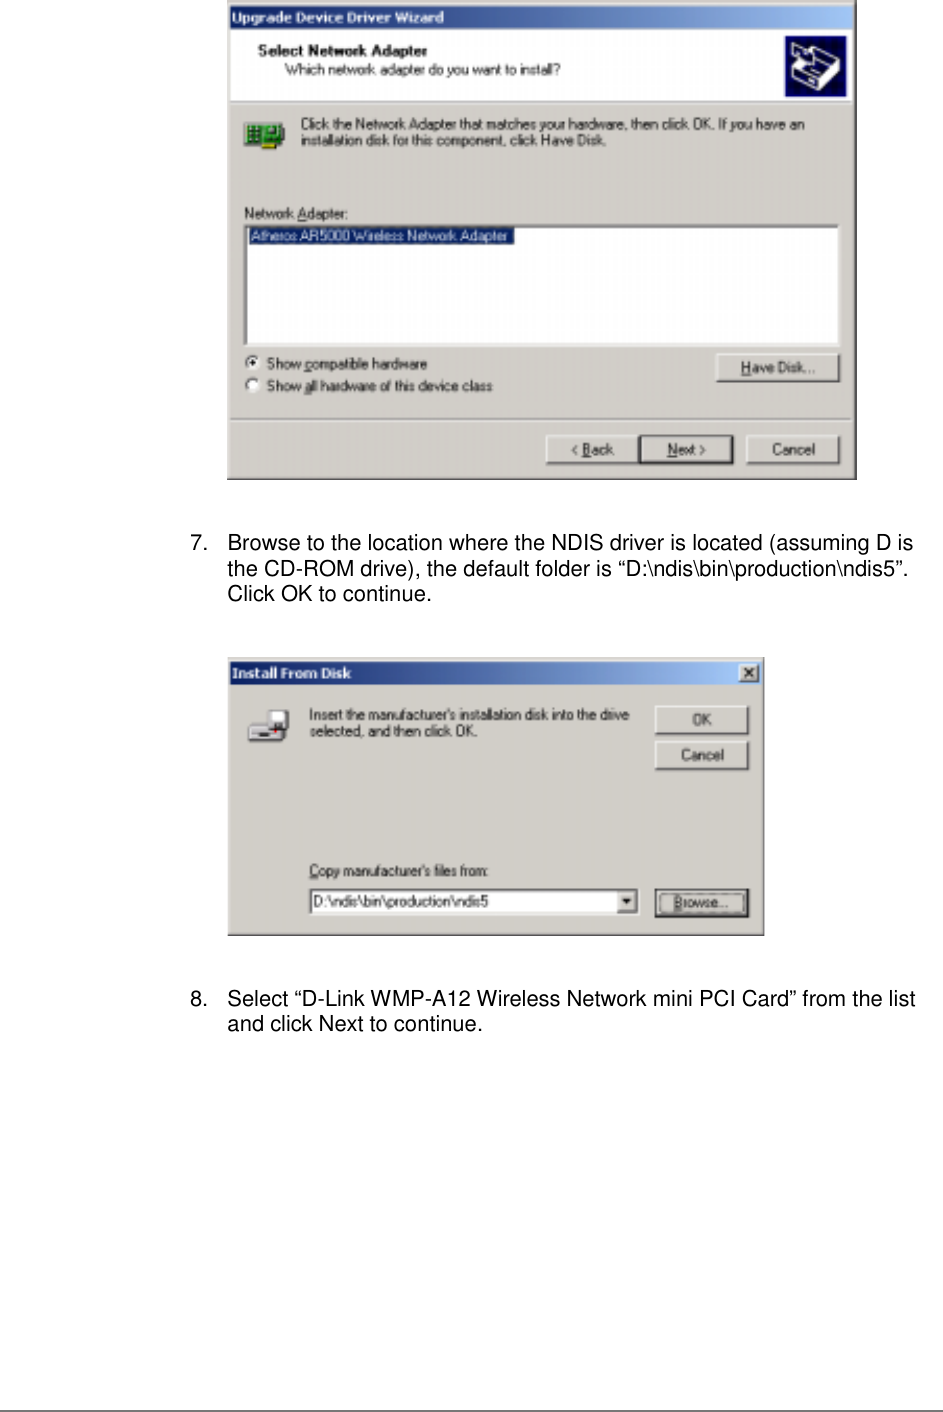 7.  Browse to the location where the NDIS driver is located (assuming D isthe CD-ROM drive), the default folder is “D:\ndis\bin\production\ndis5”.Click OK to continue.8.  Select “D-Link WMP-A12 Wireless Network mini PCI Card” from the listand click Next to continue.